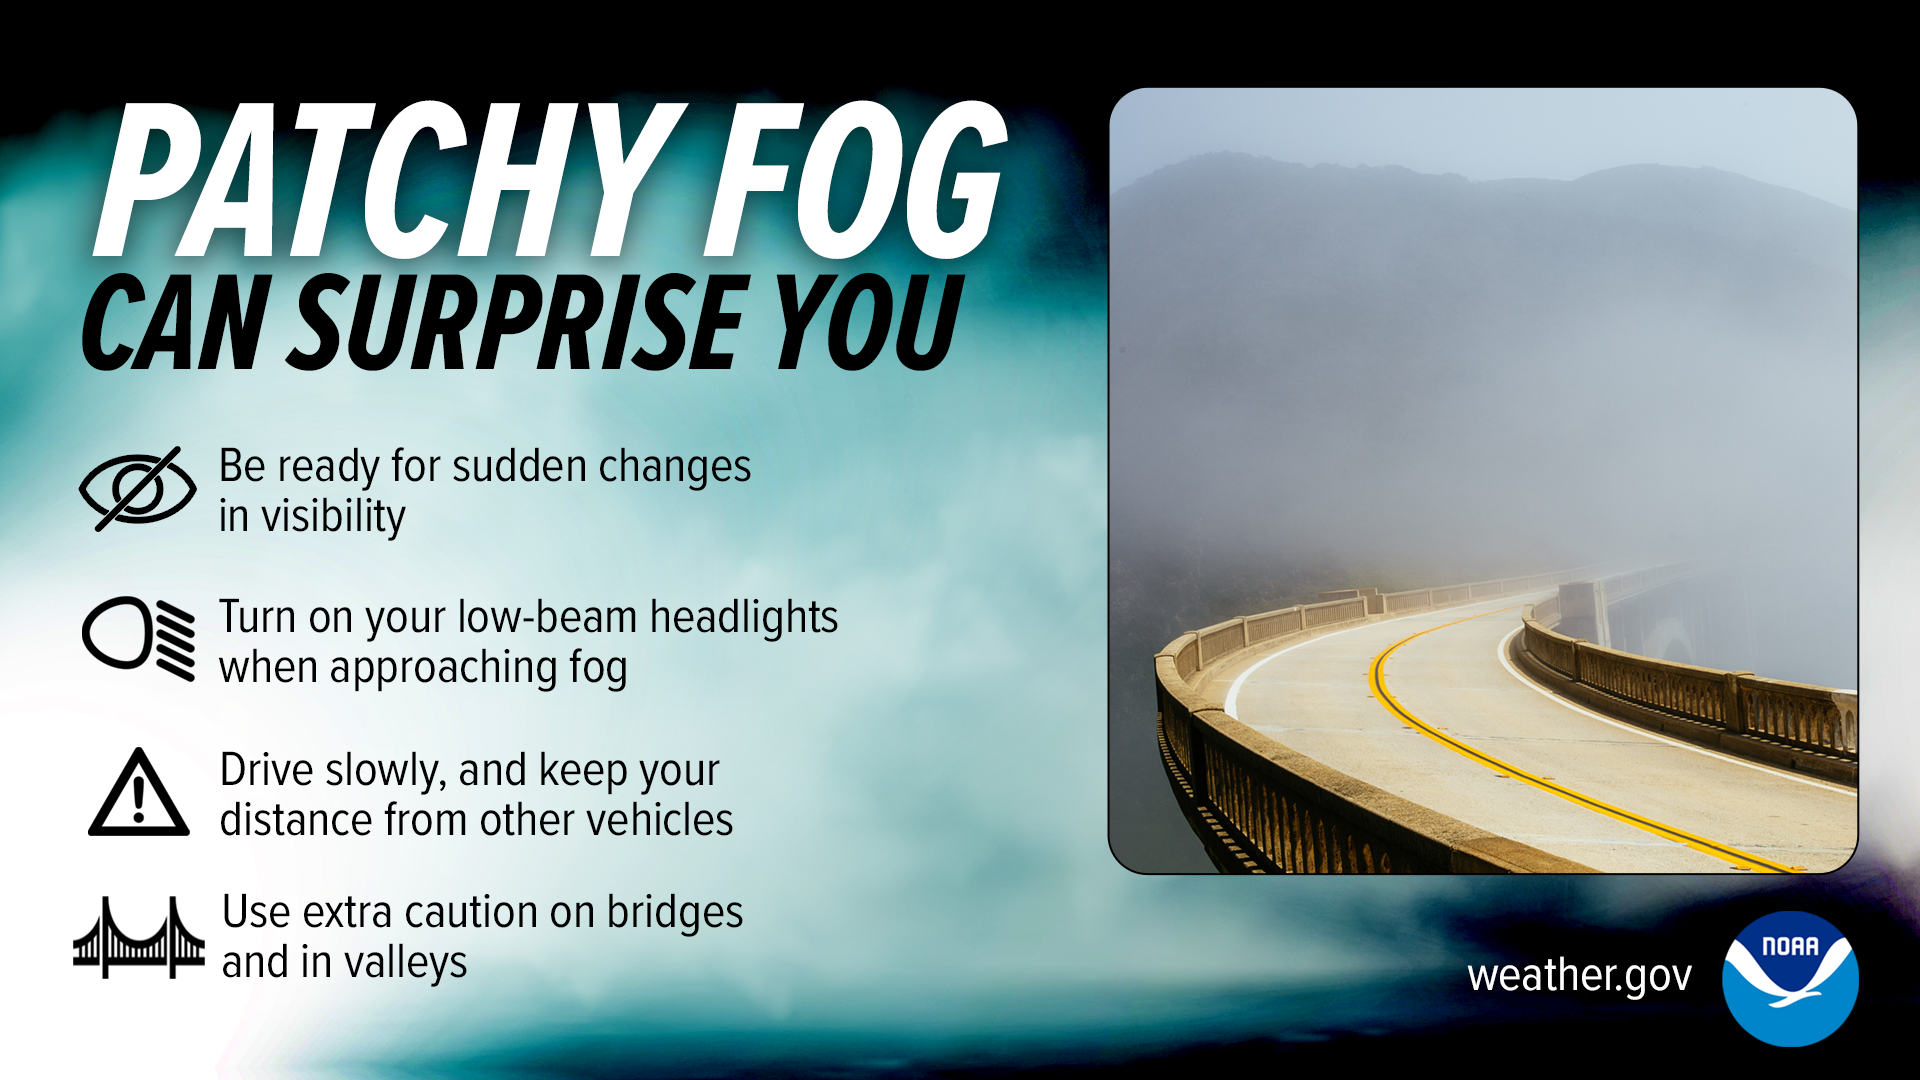 Patchy fog can surprise you:
Be ready for sudden changes in visibility.
Turn on your low-beam headlights when approaching fog.
Drive slowly, and keep your distance from other vehicles.
Use extra caution on bridges and in valleys.
